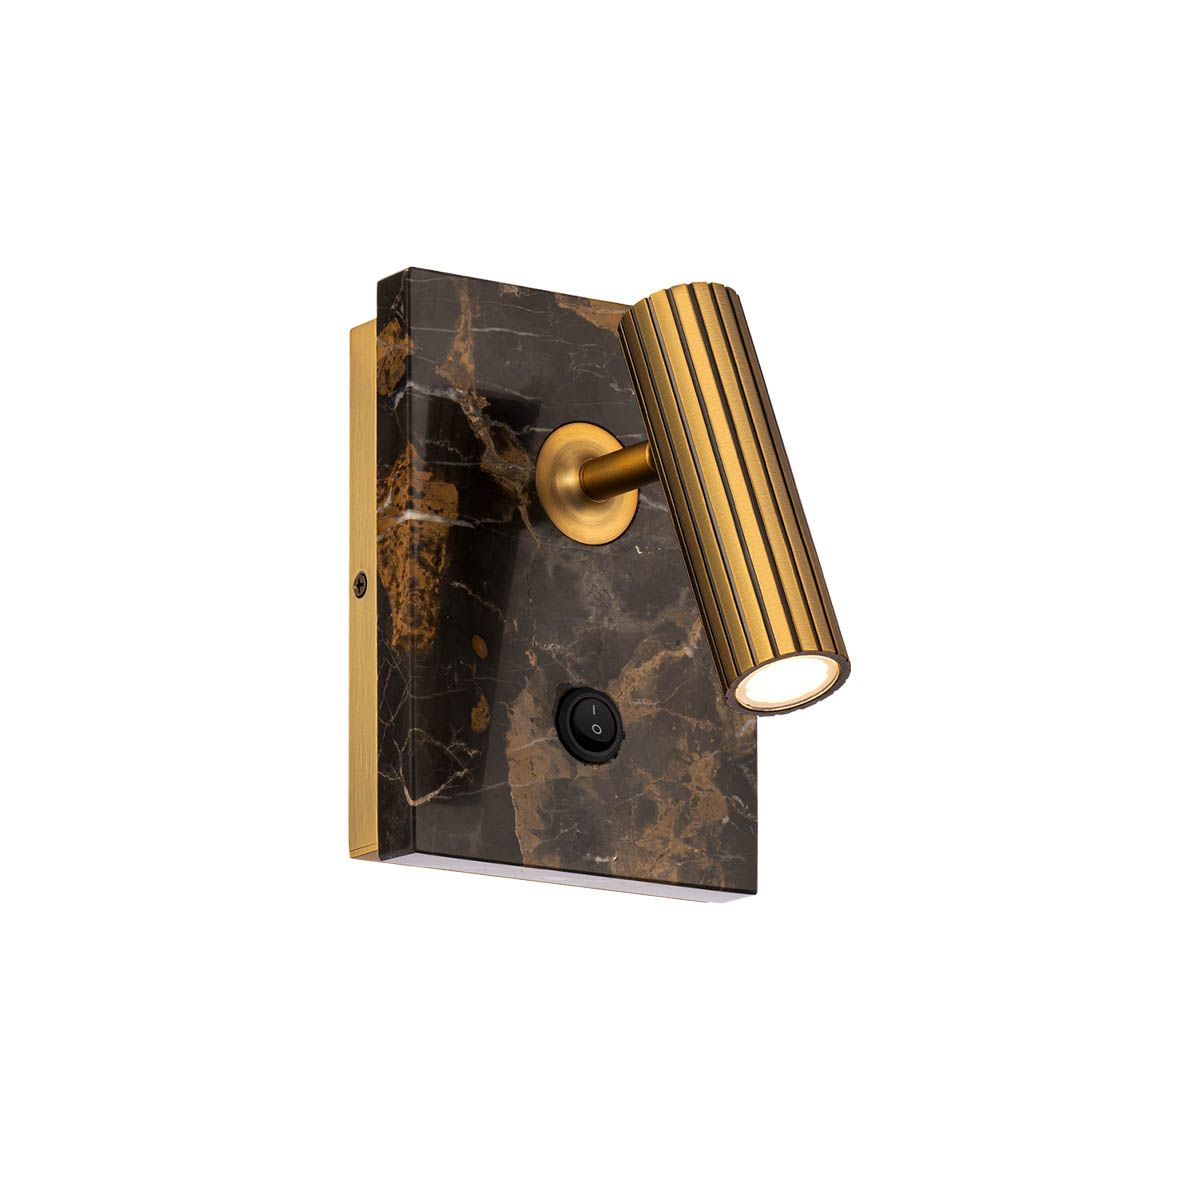 Nexus 7 in. LED Wall Sconce Black & Brass finish